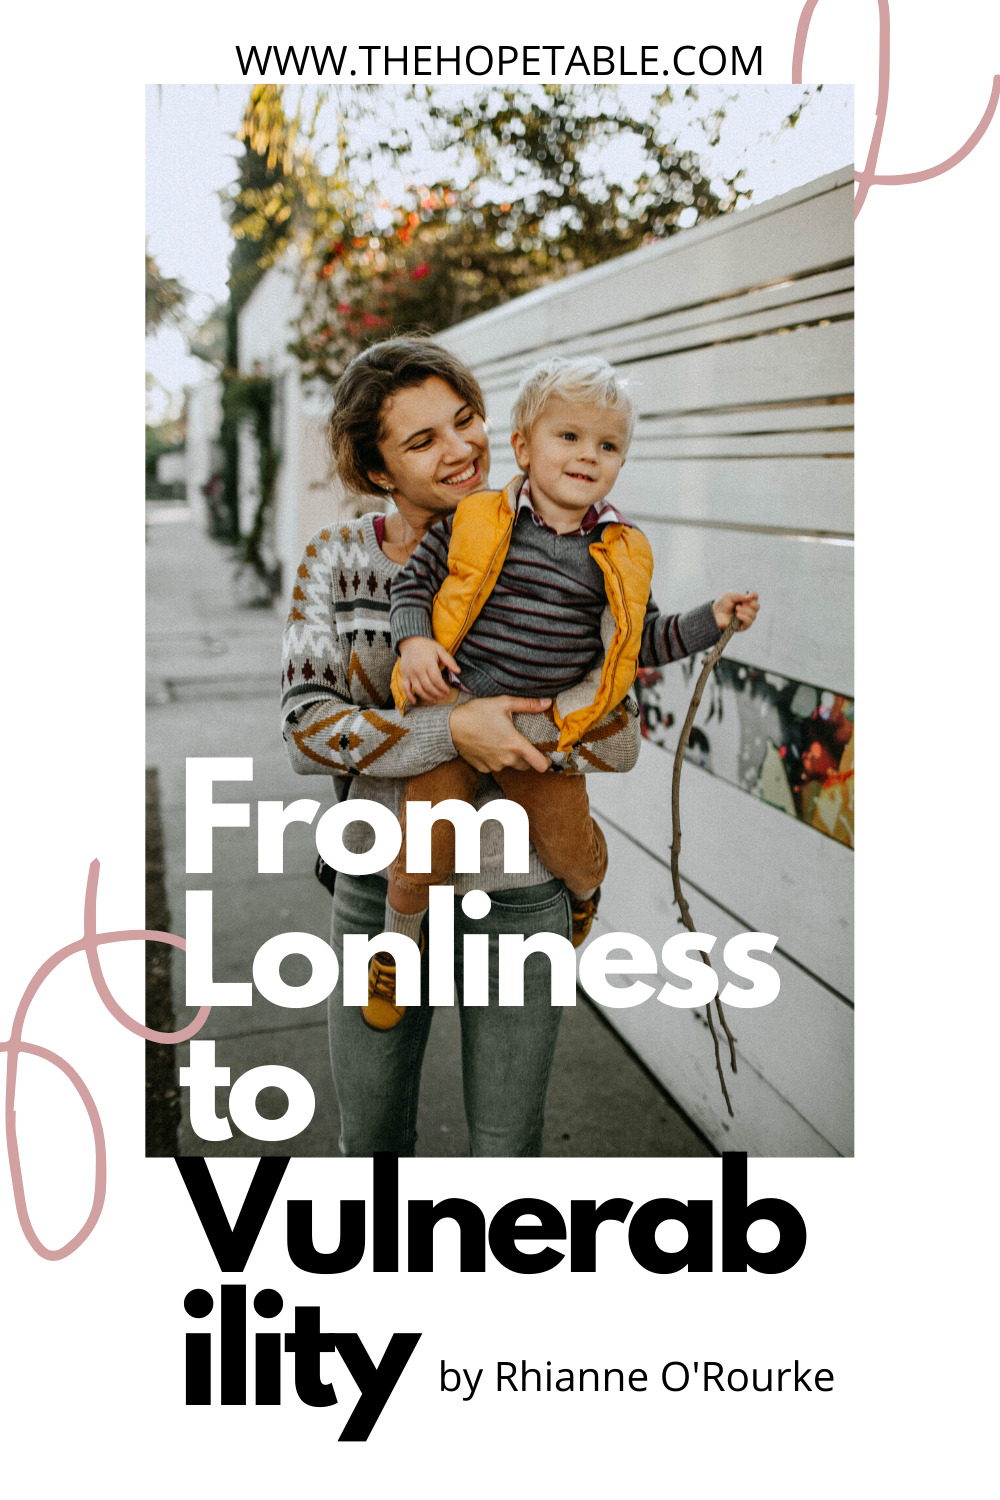 From Loneliness to Vulnerability by Rhianne O'Rourke - Blog for Christian Women - Pinterest